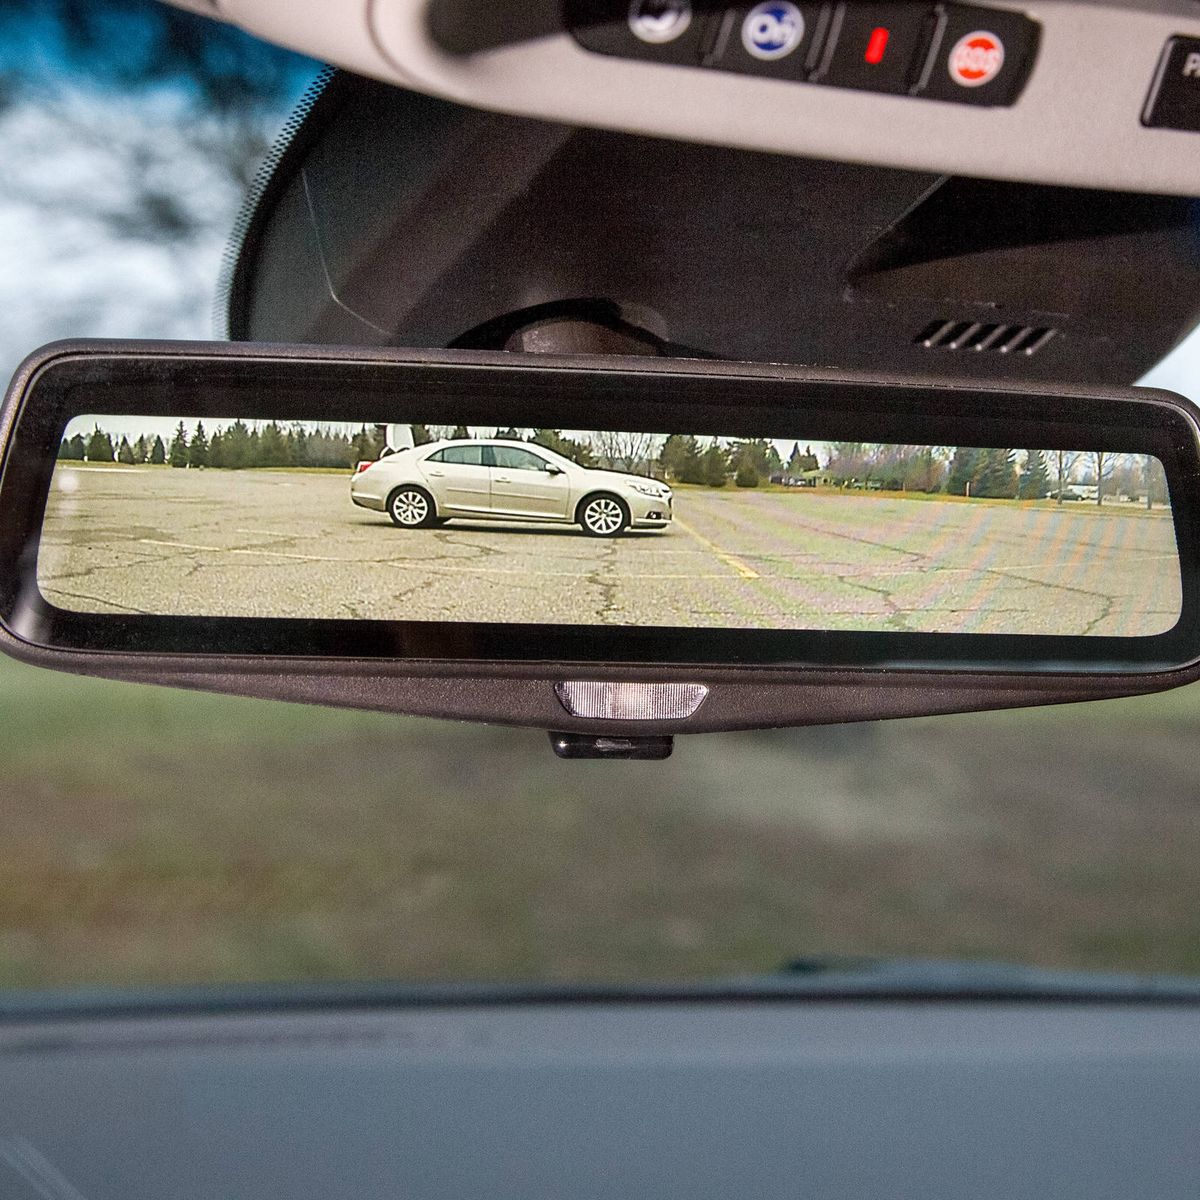 Cadillac CT6 Interior Rearview Mirror to Stream Video